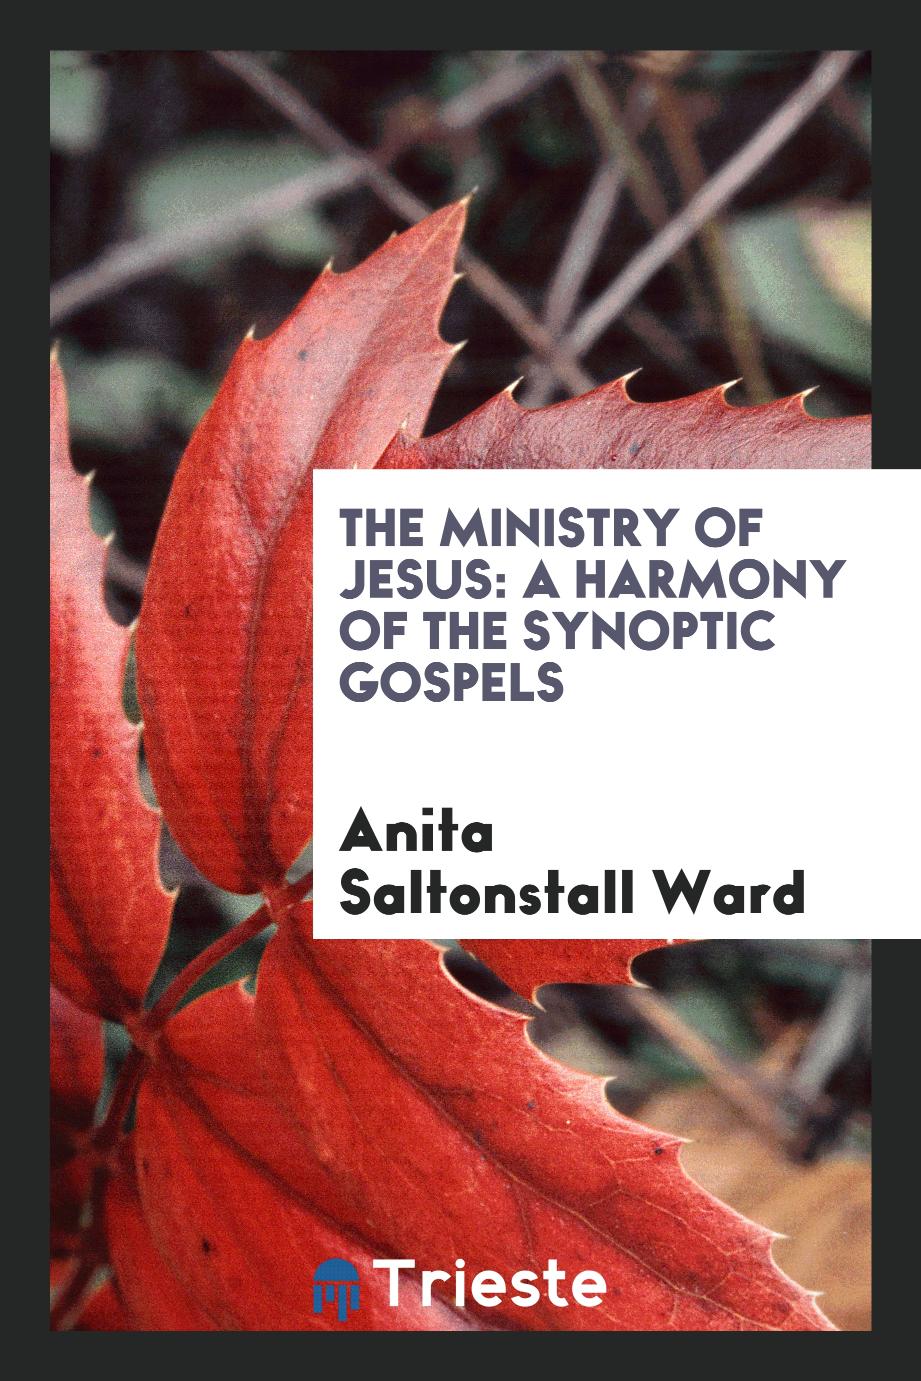 The Ministry of Jesus: A Harmony of the Synoptic Gospels